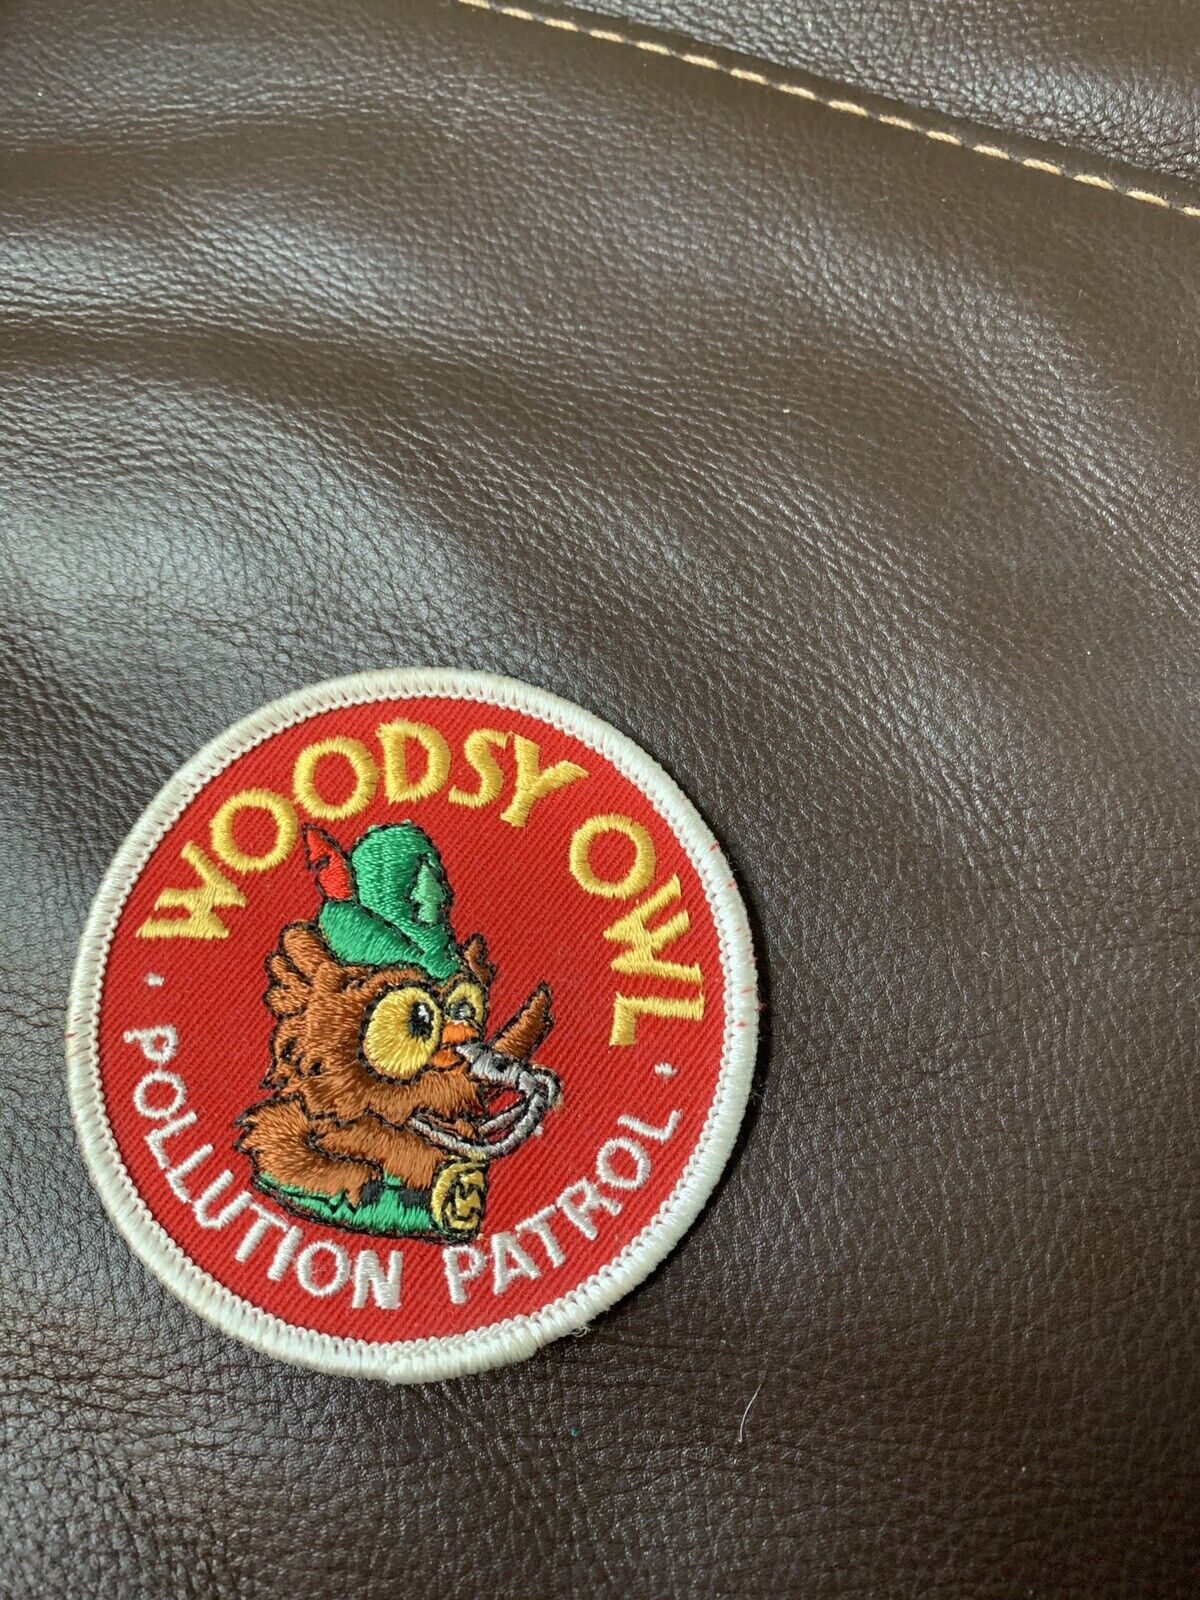 Vintage 70s WOODSY OWL POLLUTION PATROL Embroidered Patch US Forest Service